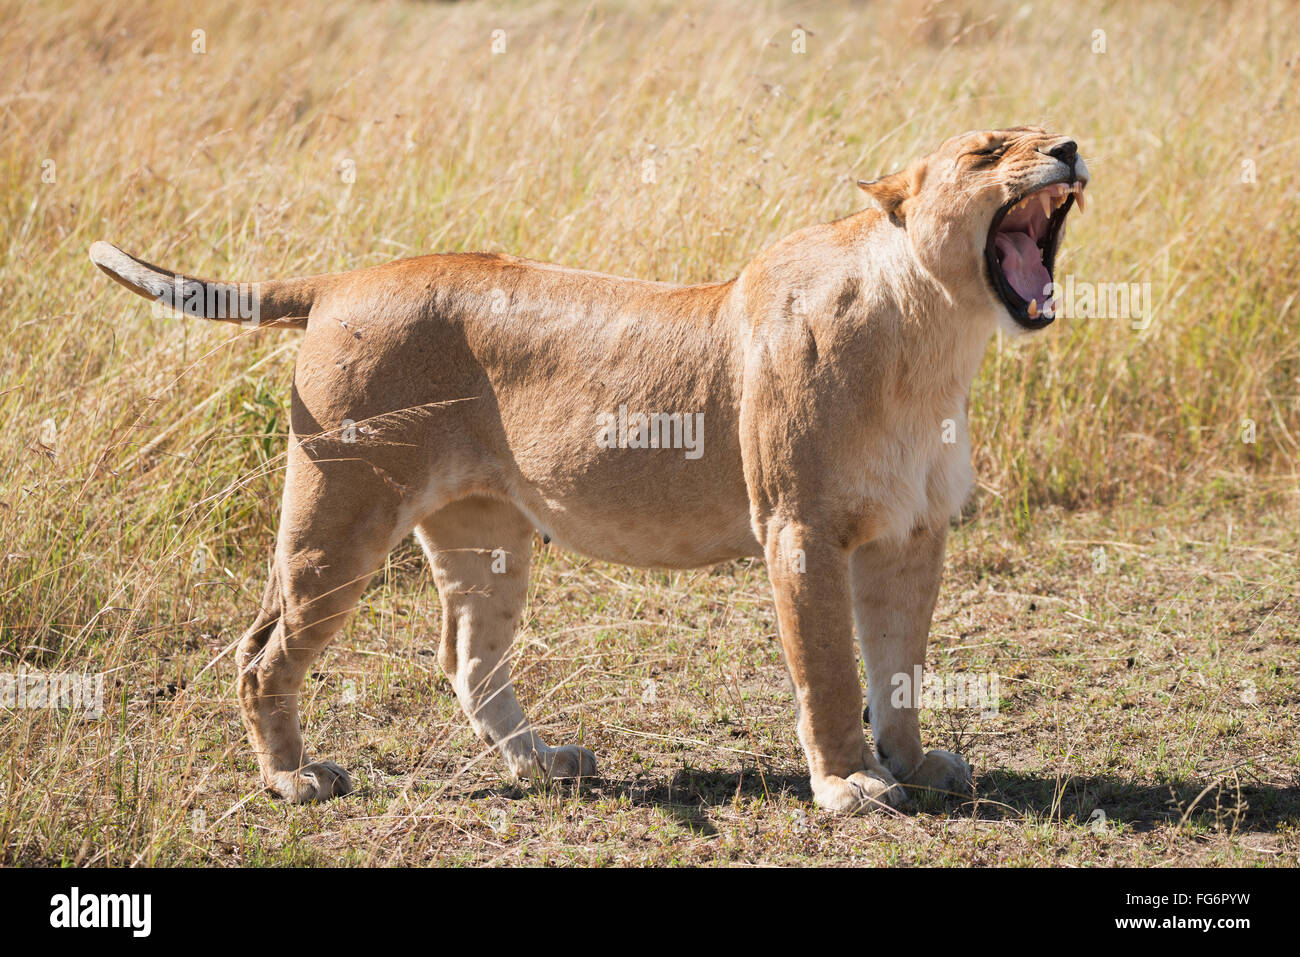 A lioness (Panthera leo) stands on the grass of the African savannah yawning with her eyes closed and mouth wide open, showing all her teeth Stock Photo